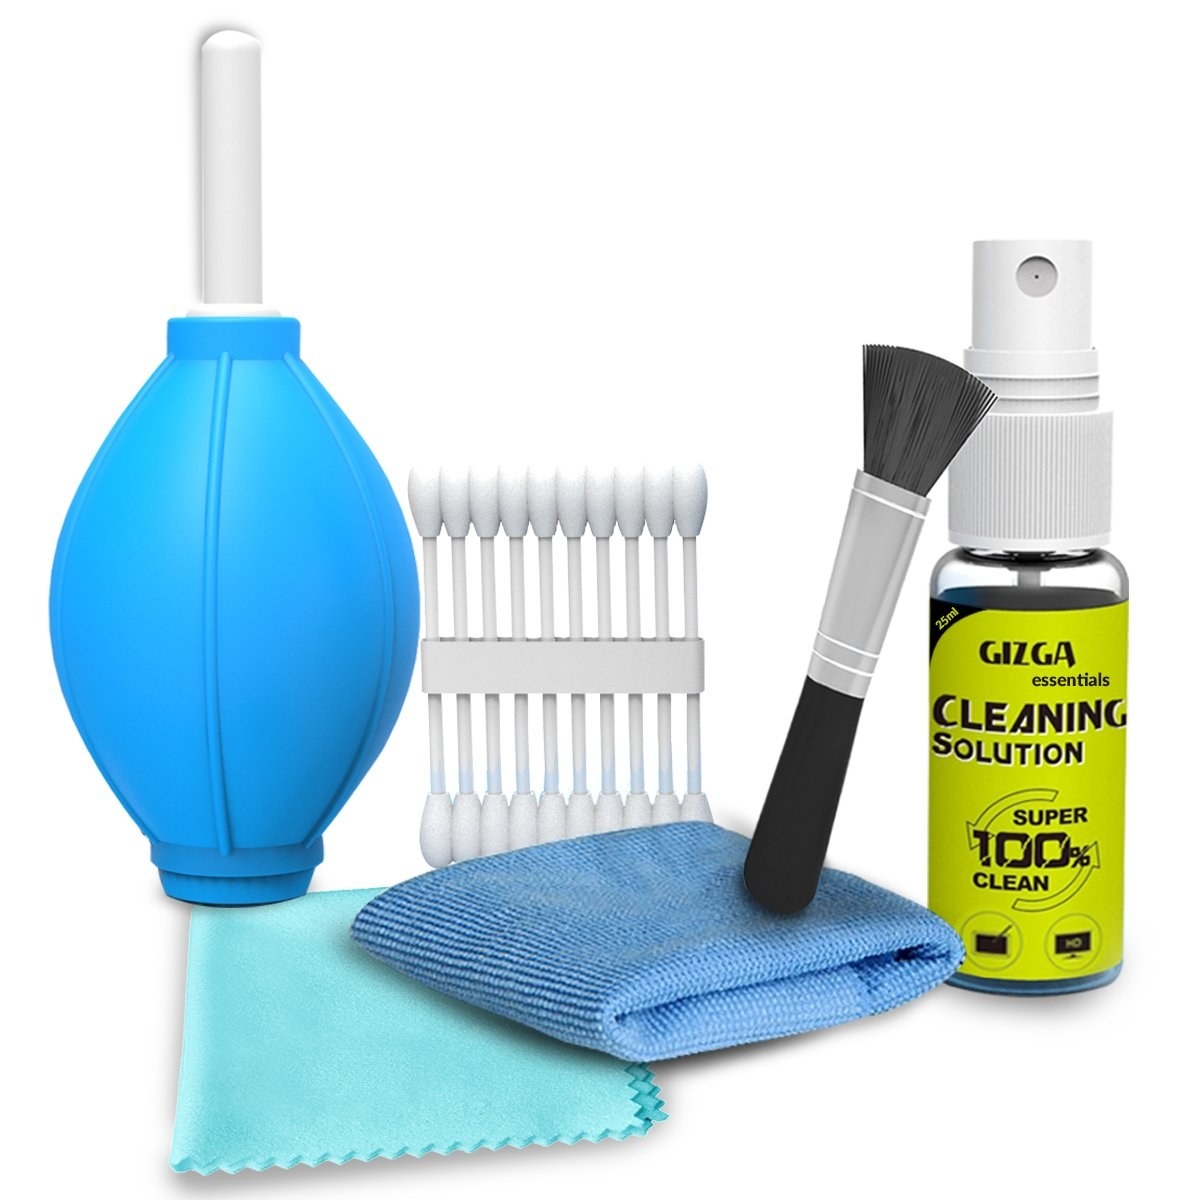 The kit contains an Air Blower, Cotton Swabs, a Microfibre Cloth, an Anti-static Cleaning Brush, and an Antibacterial Cleaning Solution